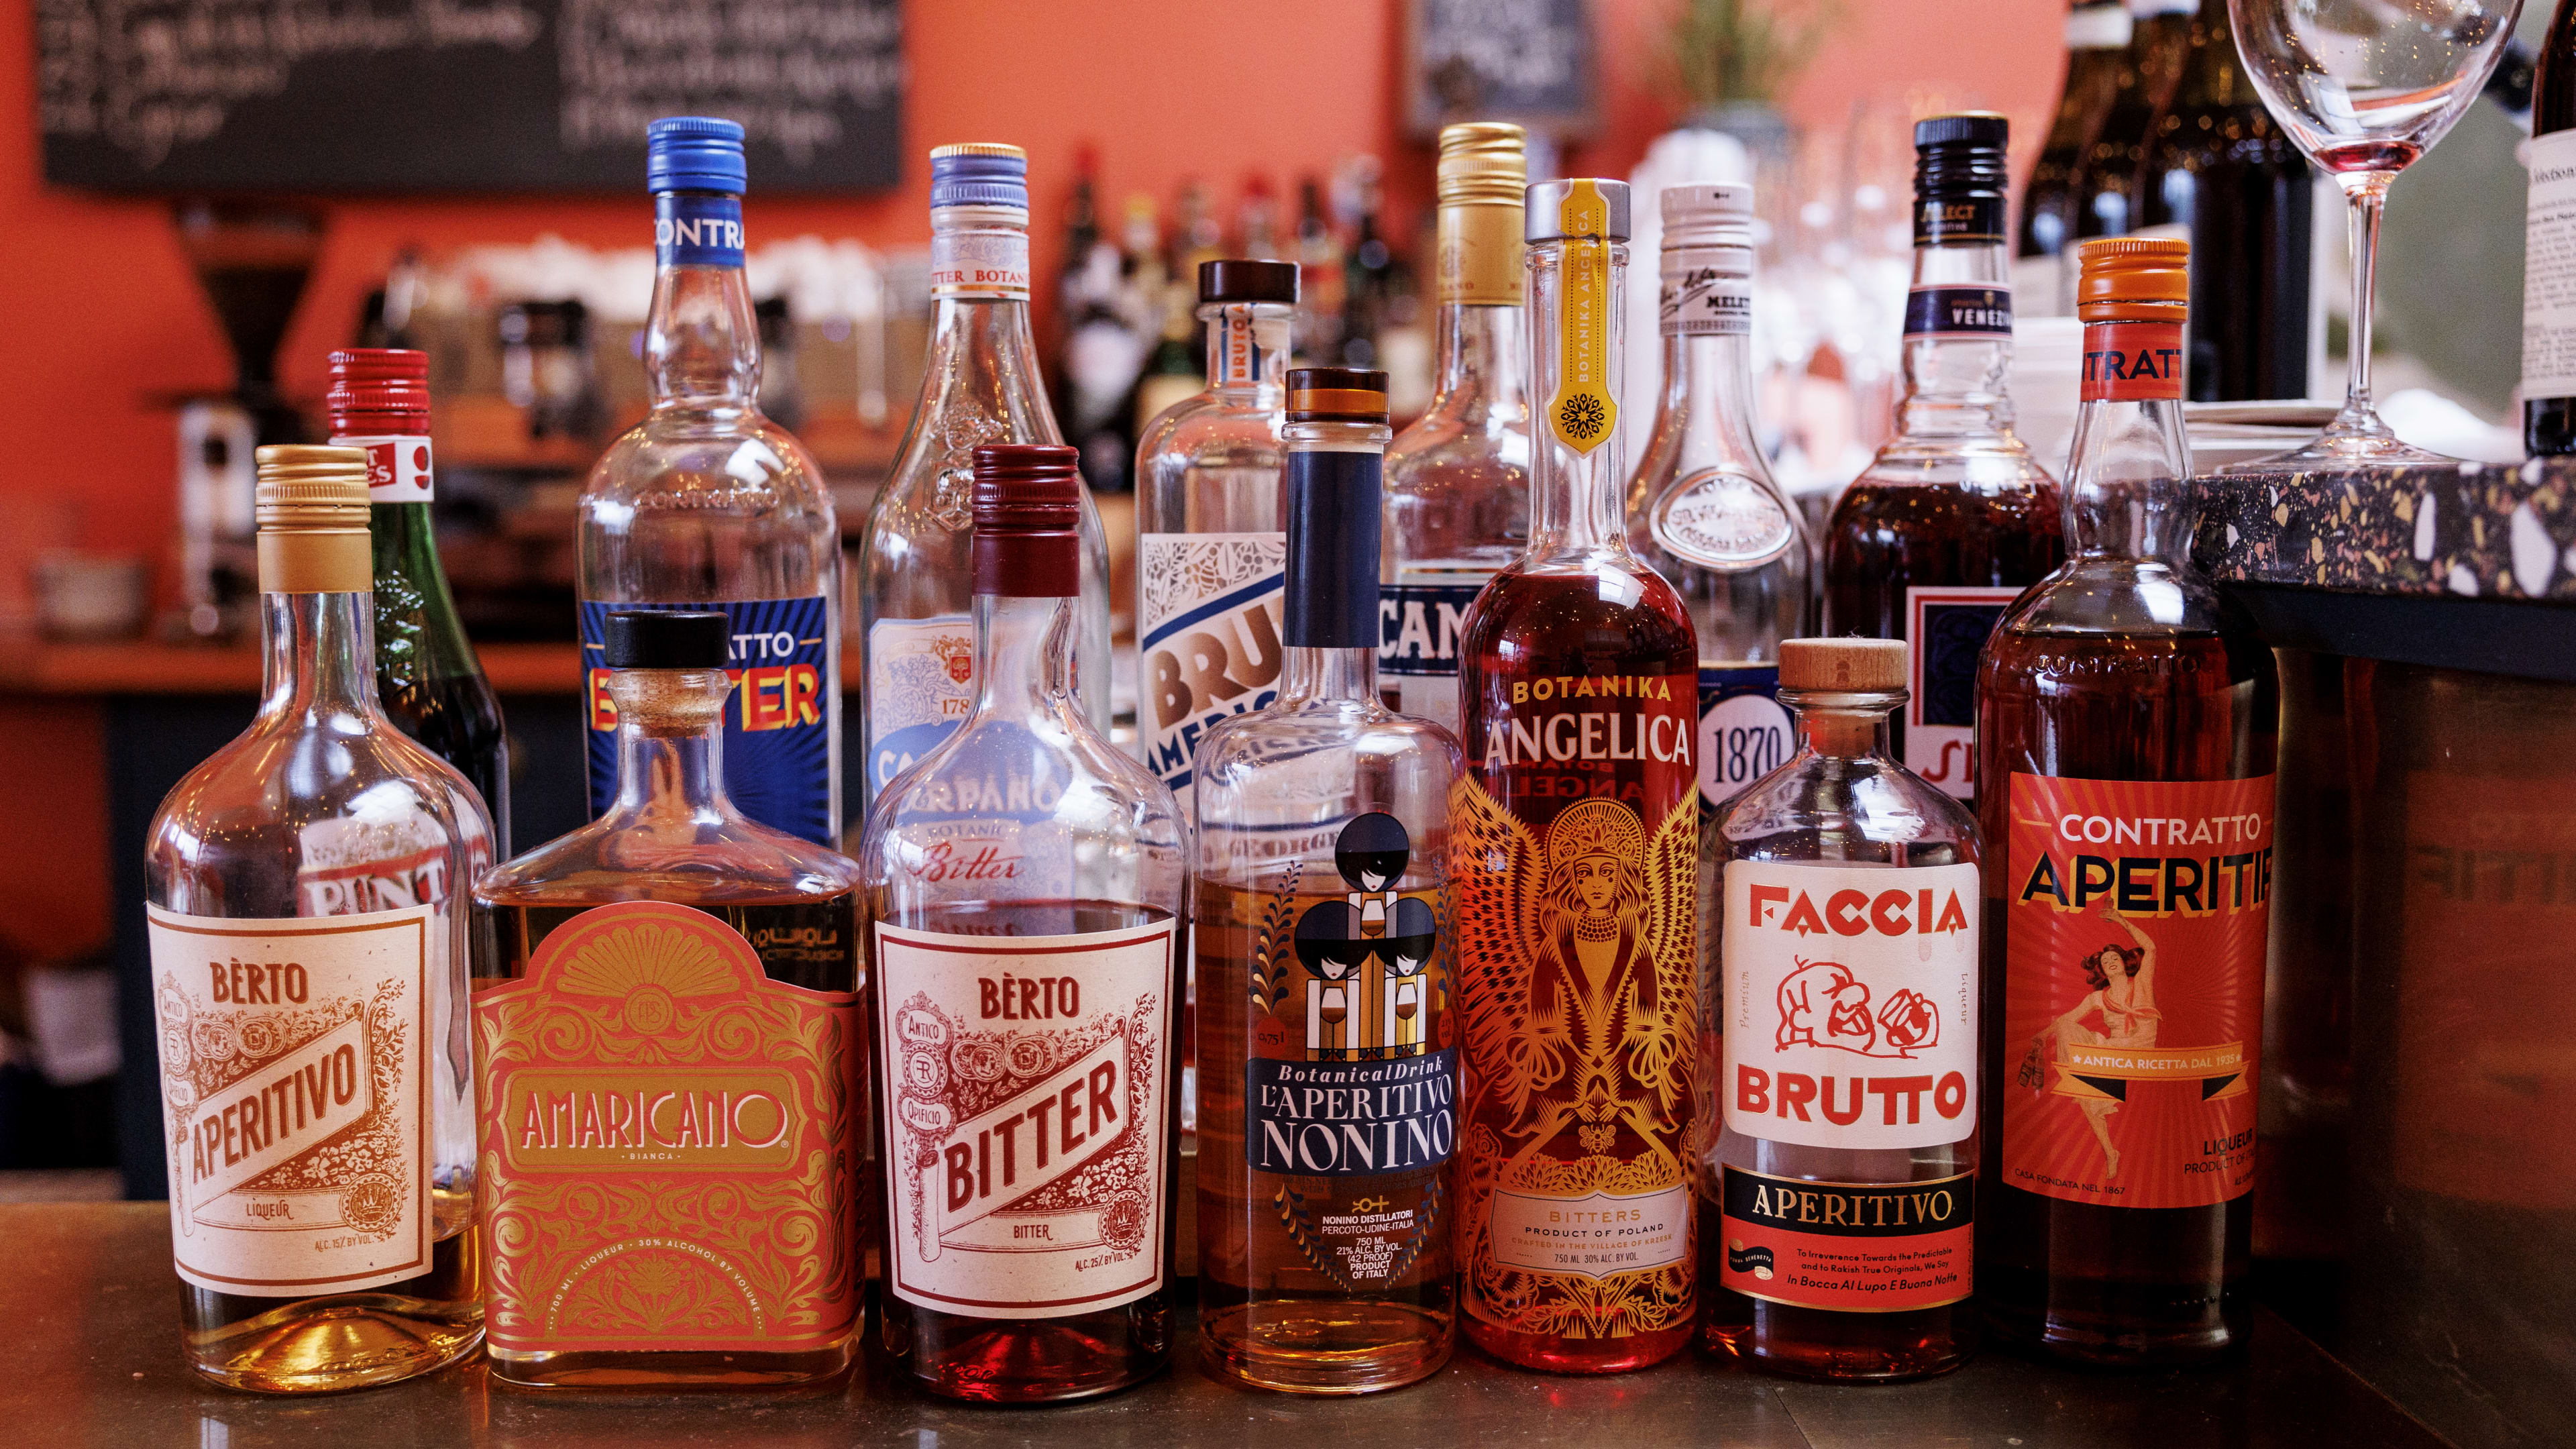 Bottles of aperitifs lined up on a bar.